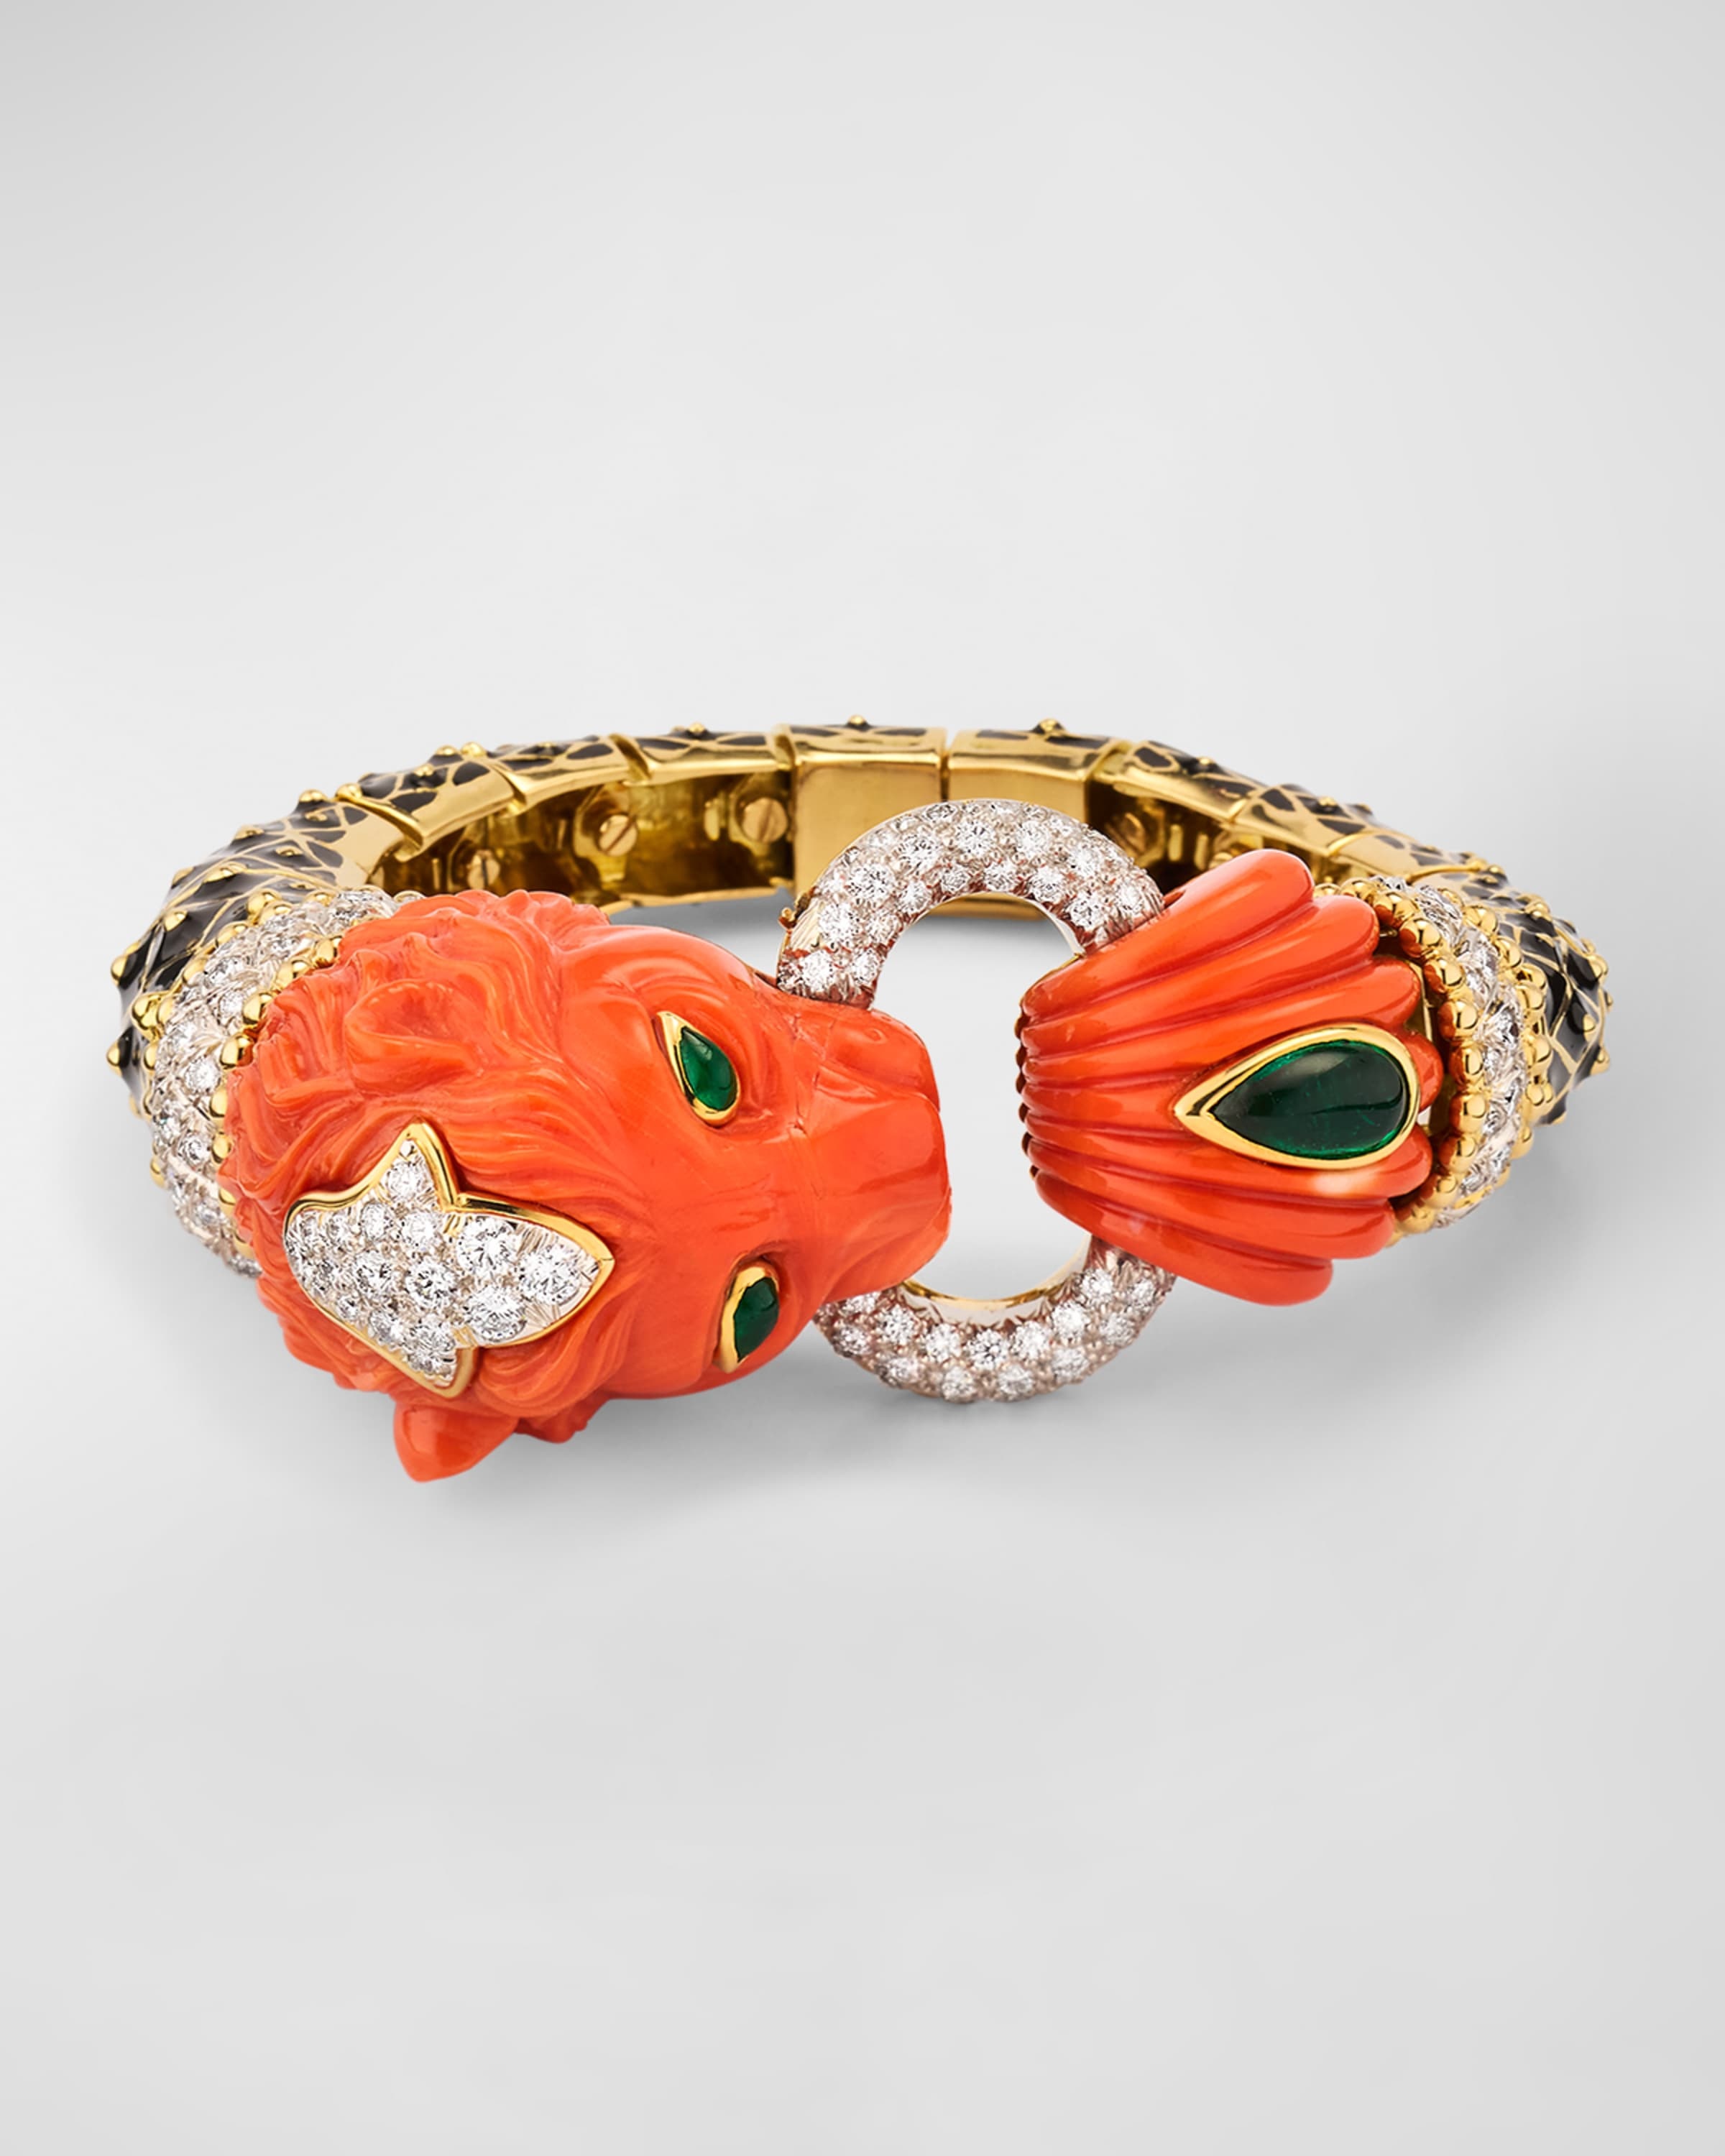 18K Yellow Gold and Platinum Lion Bracelet with Coral, Emerald and Diamonds - 1